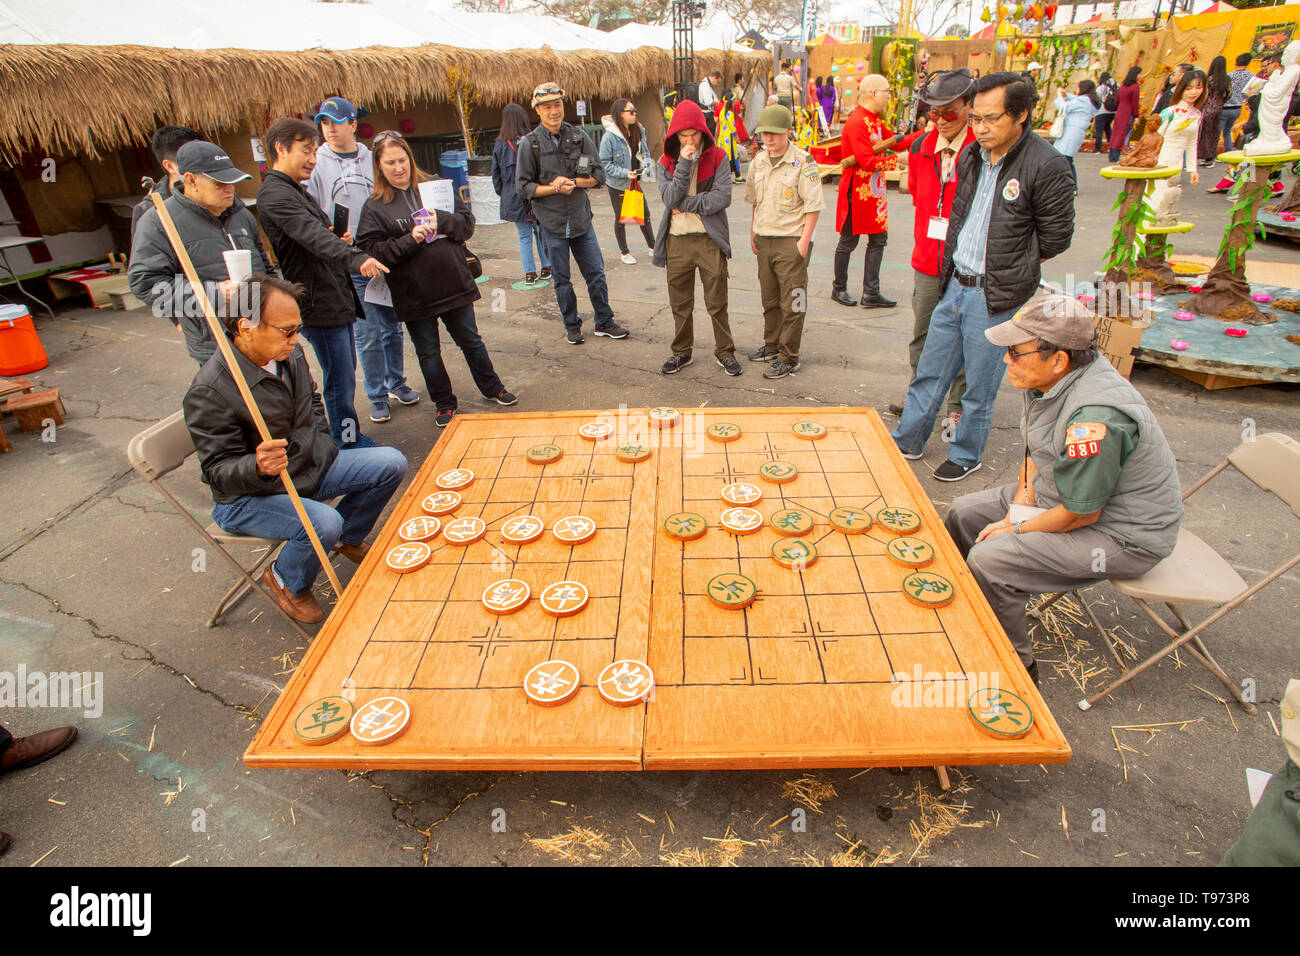 Vietnamese American men play a giant-size chess game at a Tet Lunar New Year festival in Costa Nesa, CA, as Boy Scouts watch. Stock Photo